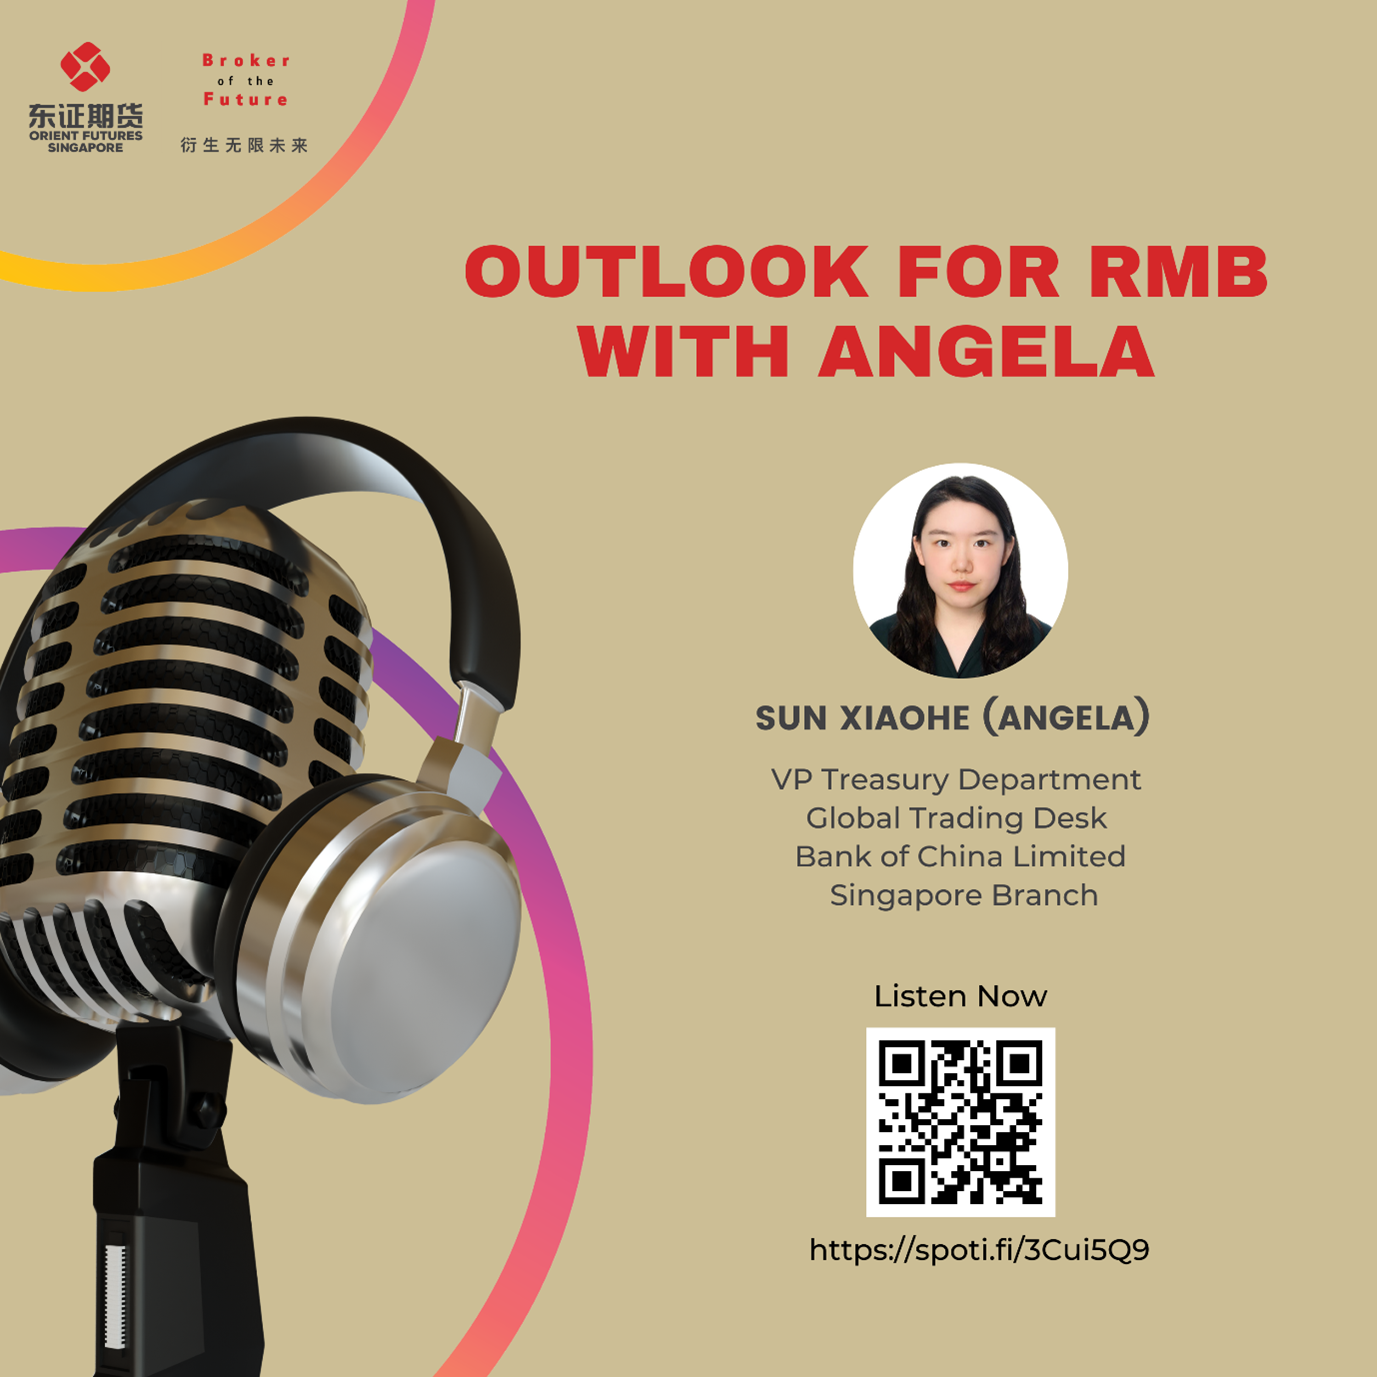 Outlook for RMB With Angela